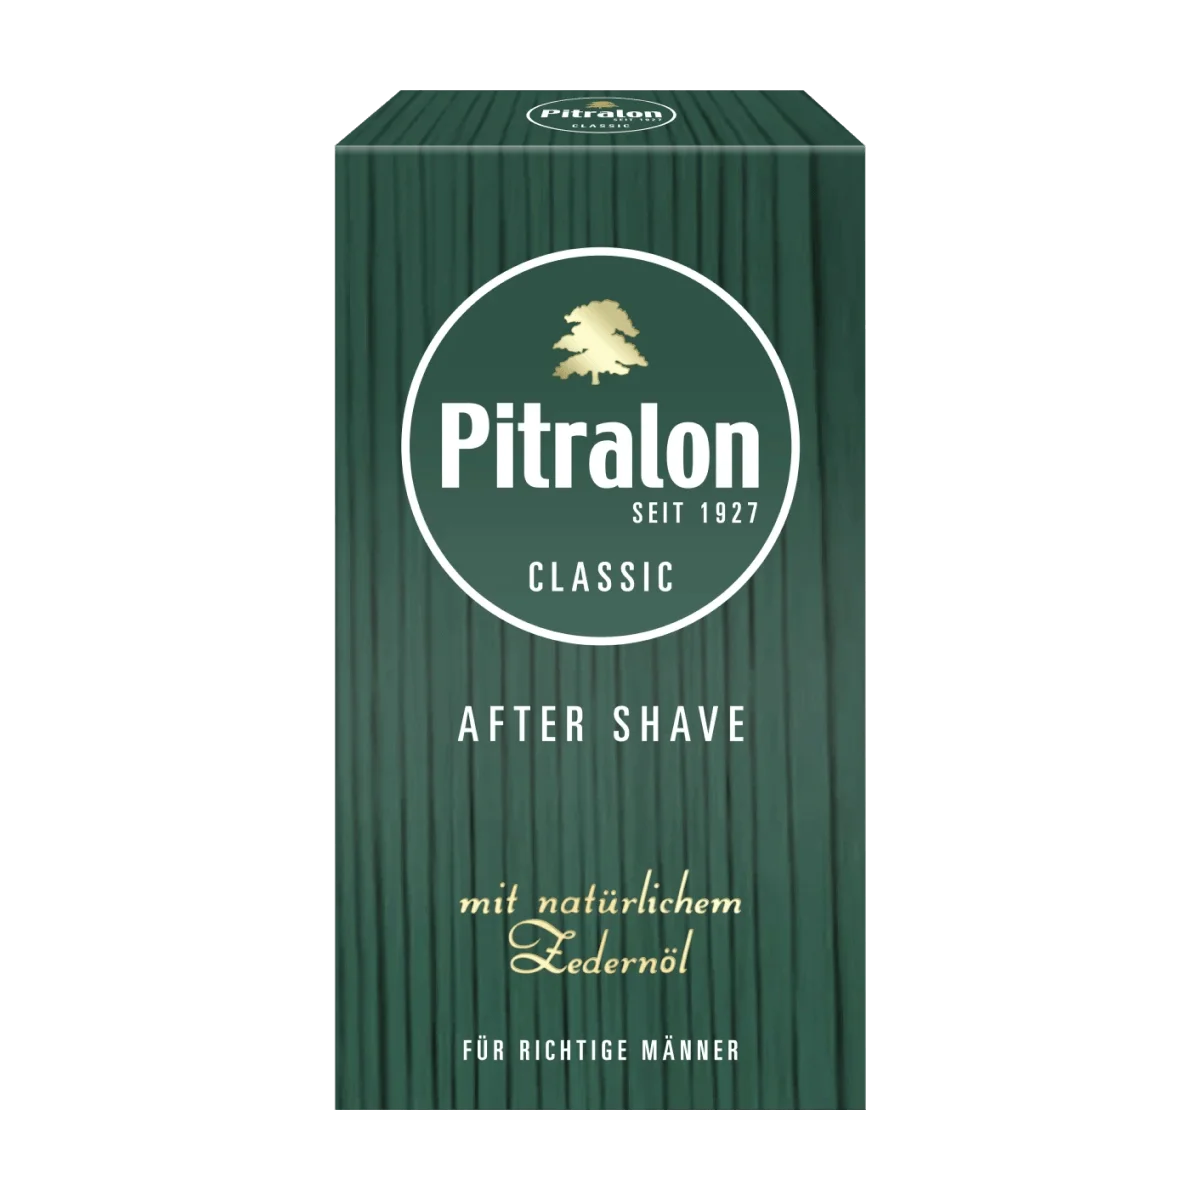 Pitralon After Shave Classic, 100 ml